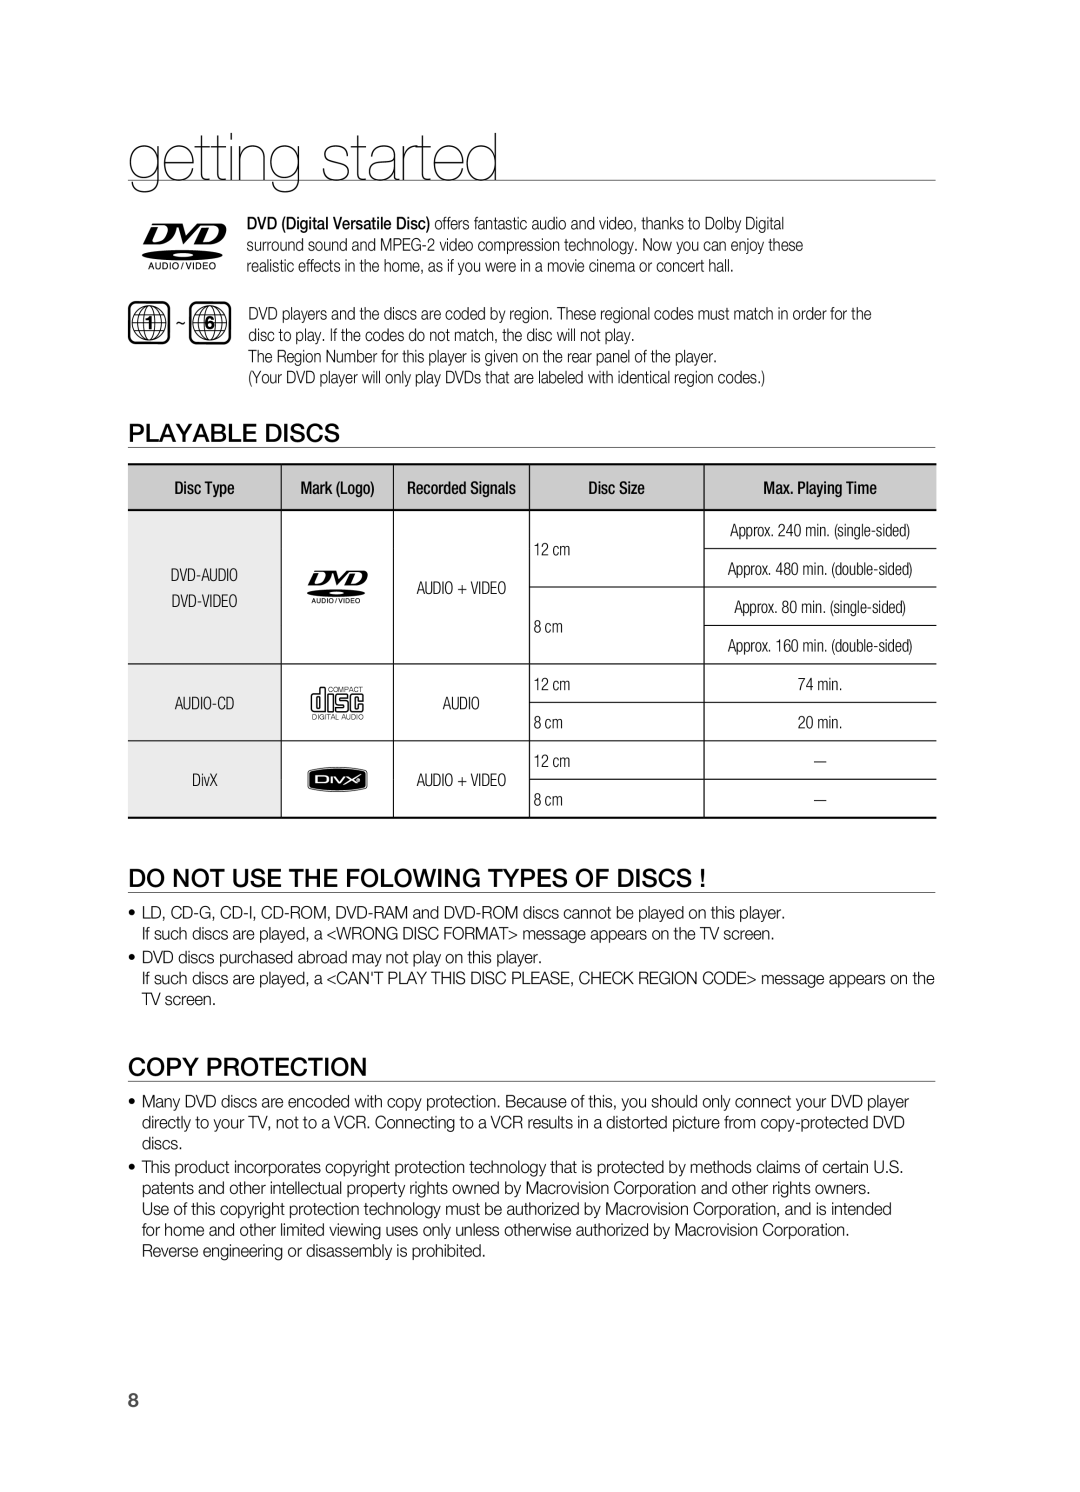 Samsung HT-TX715 user manual Playable Discs, Do not use the folowing types of discS, Copy Protection, getting started 